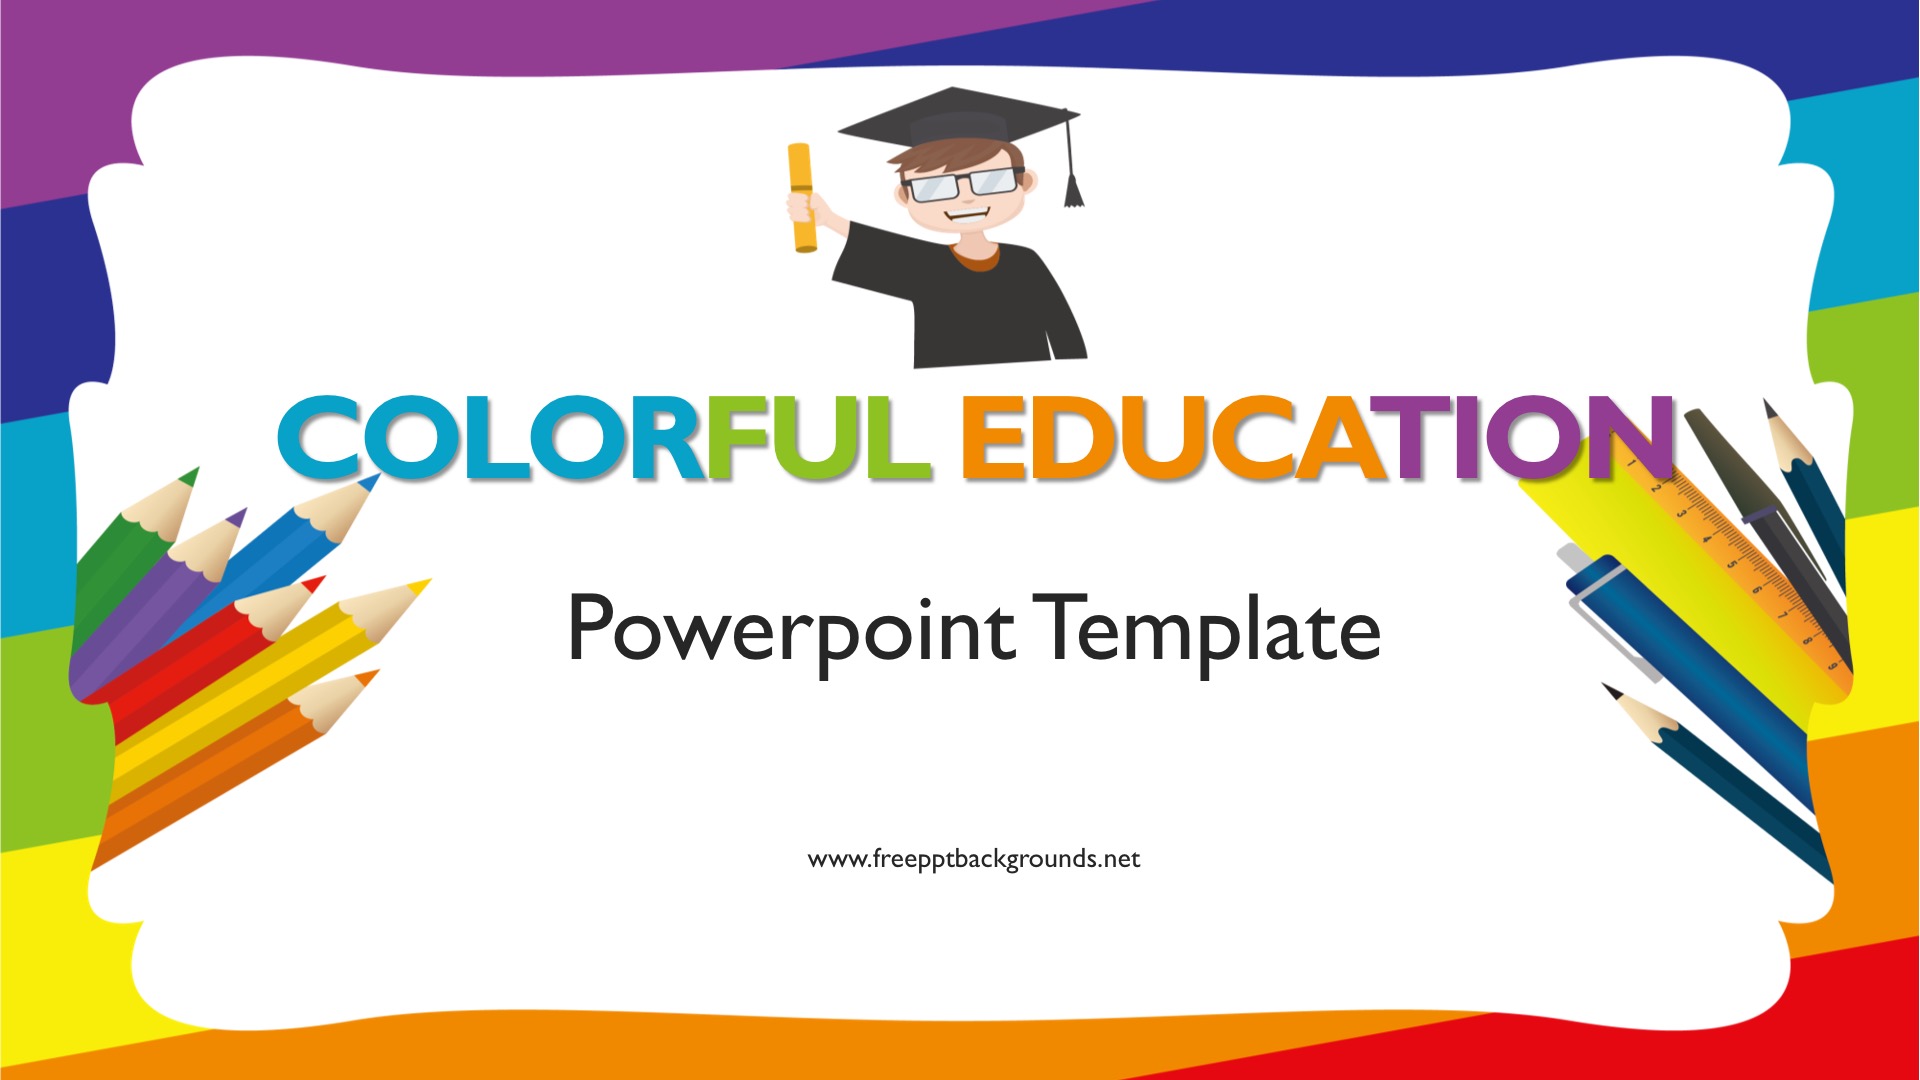 Colorful Education Powerpoint Templates - Education, School - Free PPT  Backgrounds and Templates